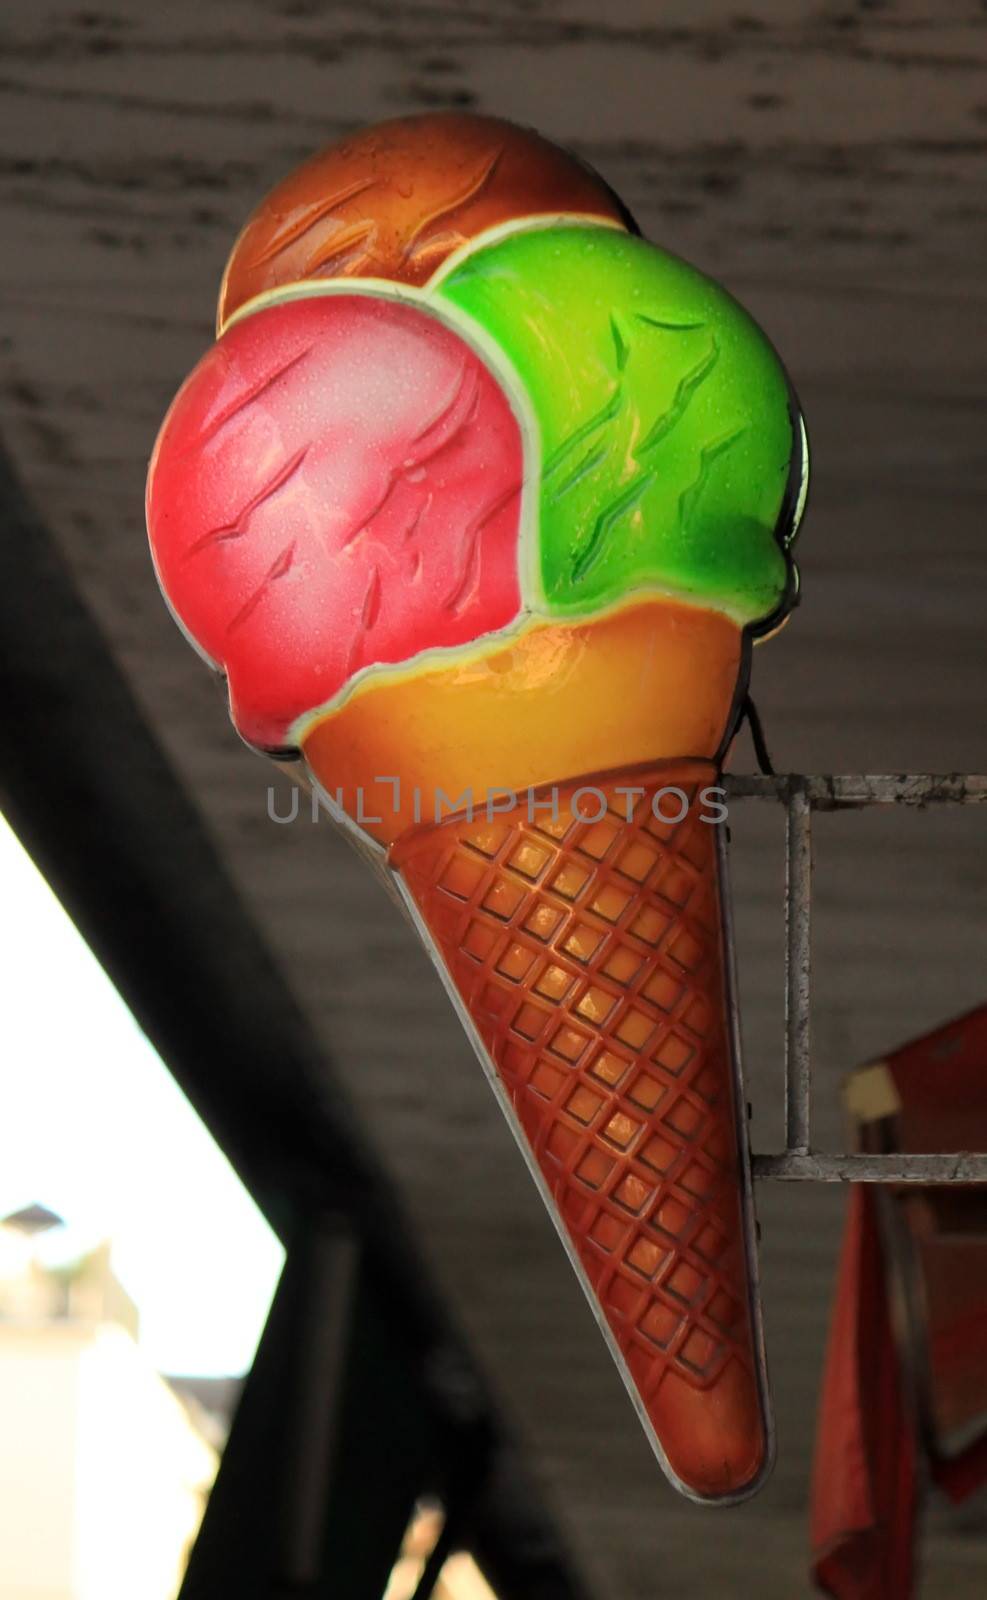 Colorful icecream design with three balls outdoor in the street